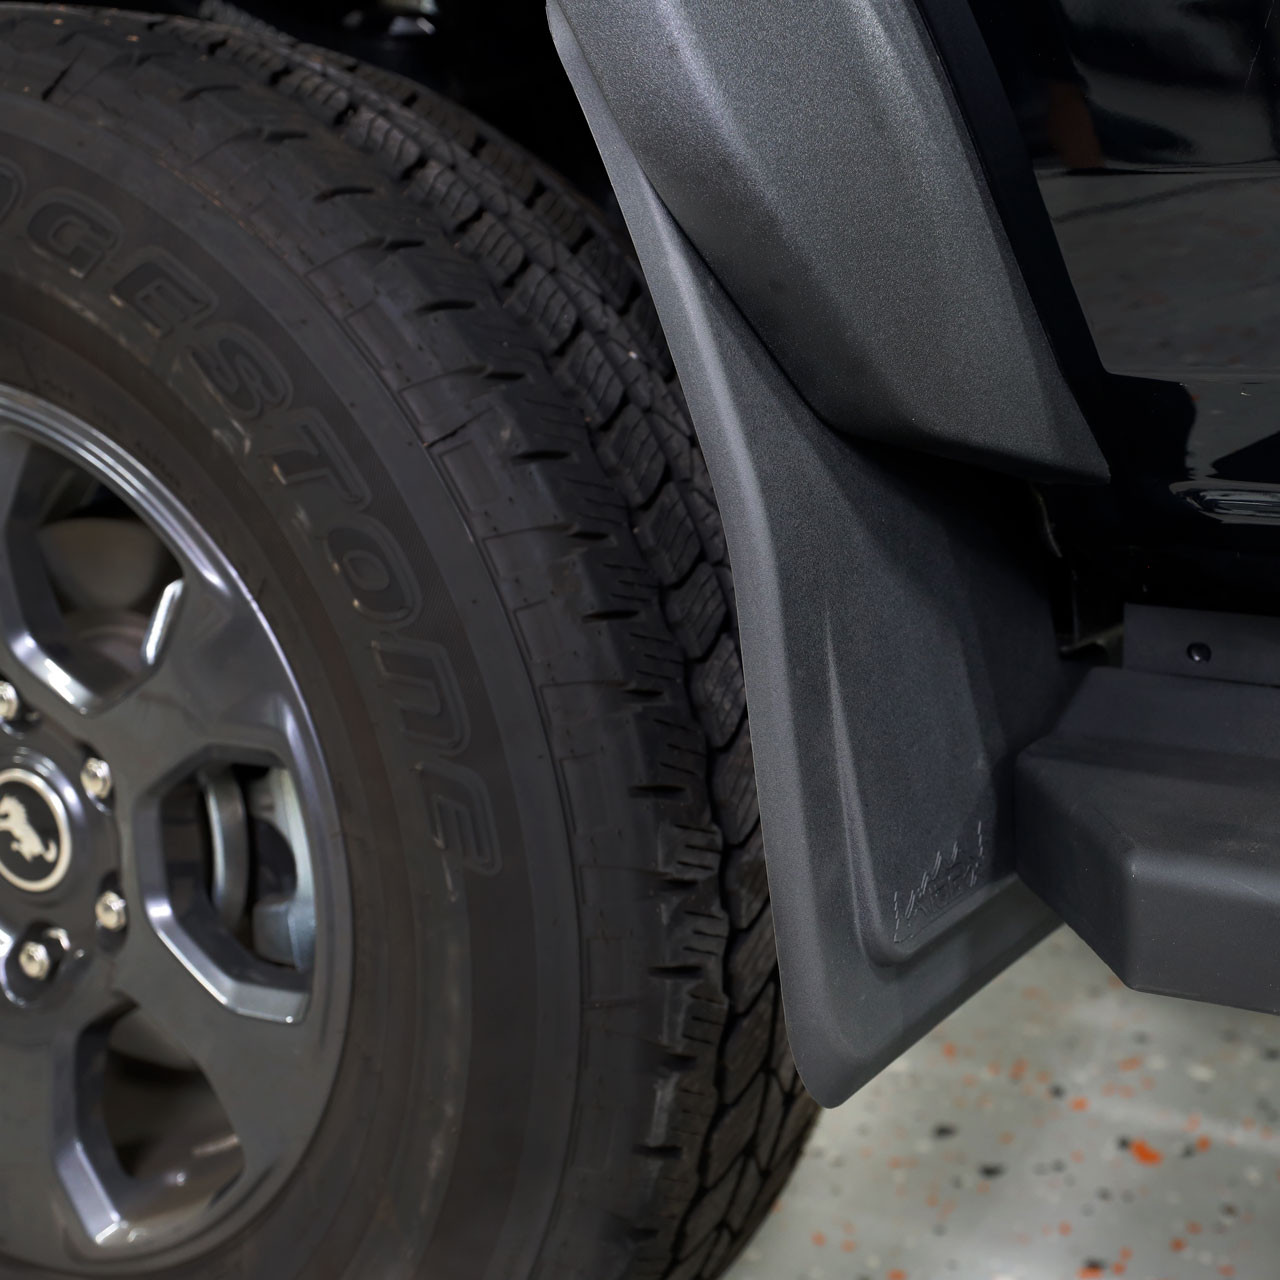 Ford Bronco New Product Release: IAG I-Line Mud Flaps 1668800019680